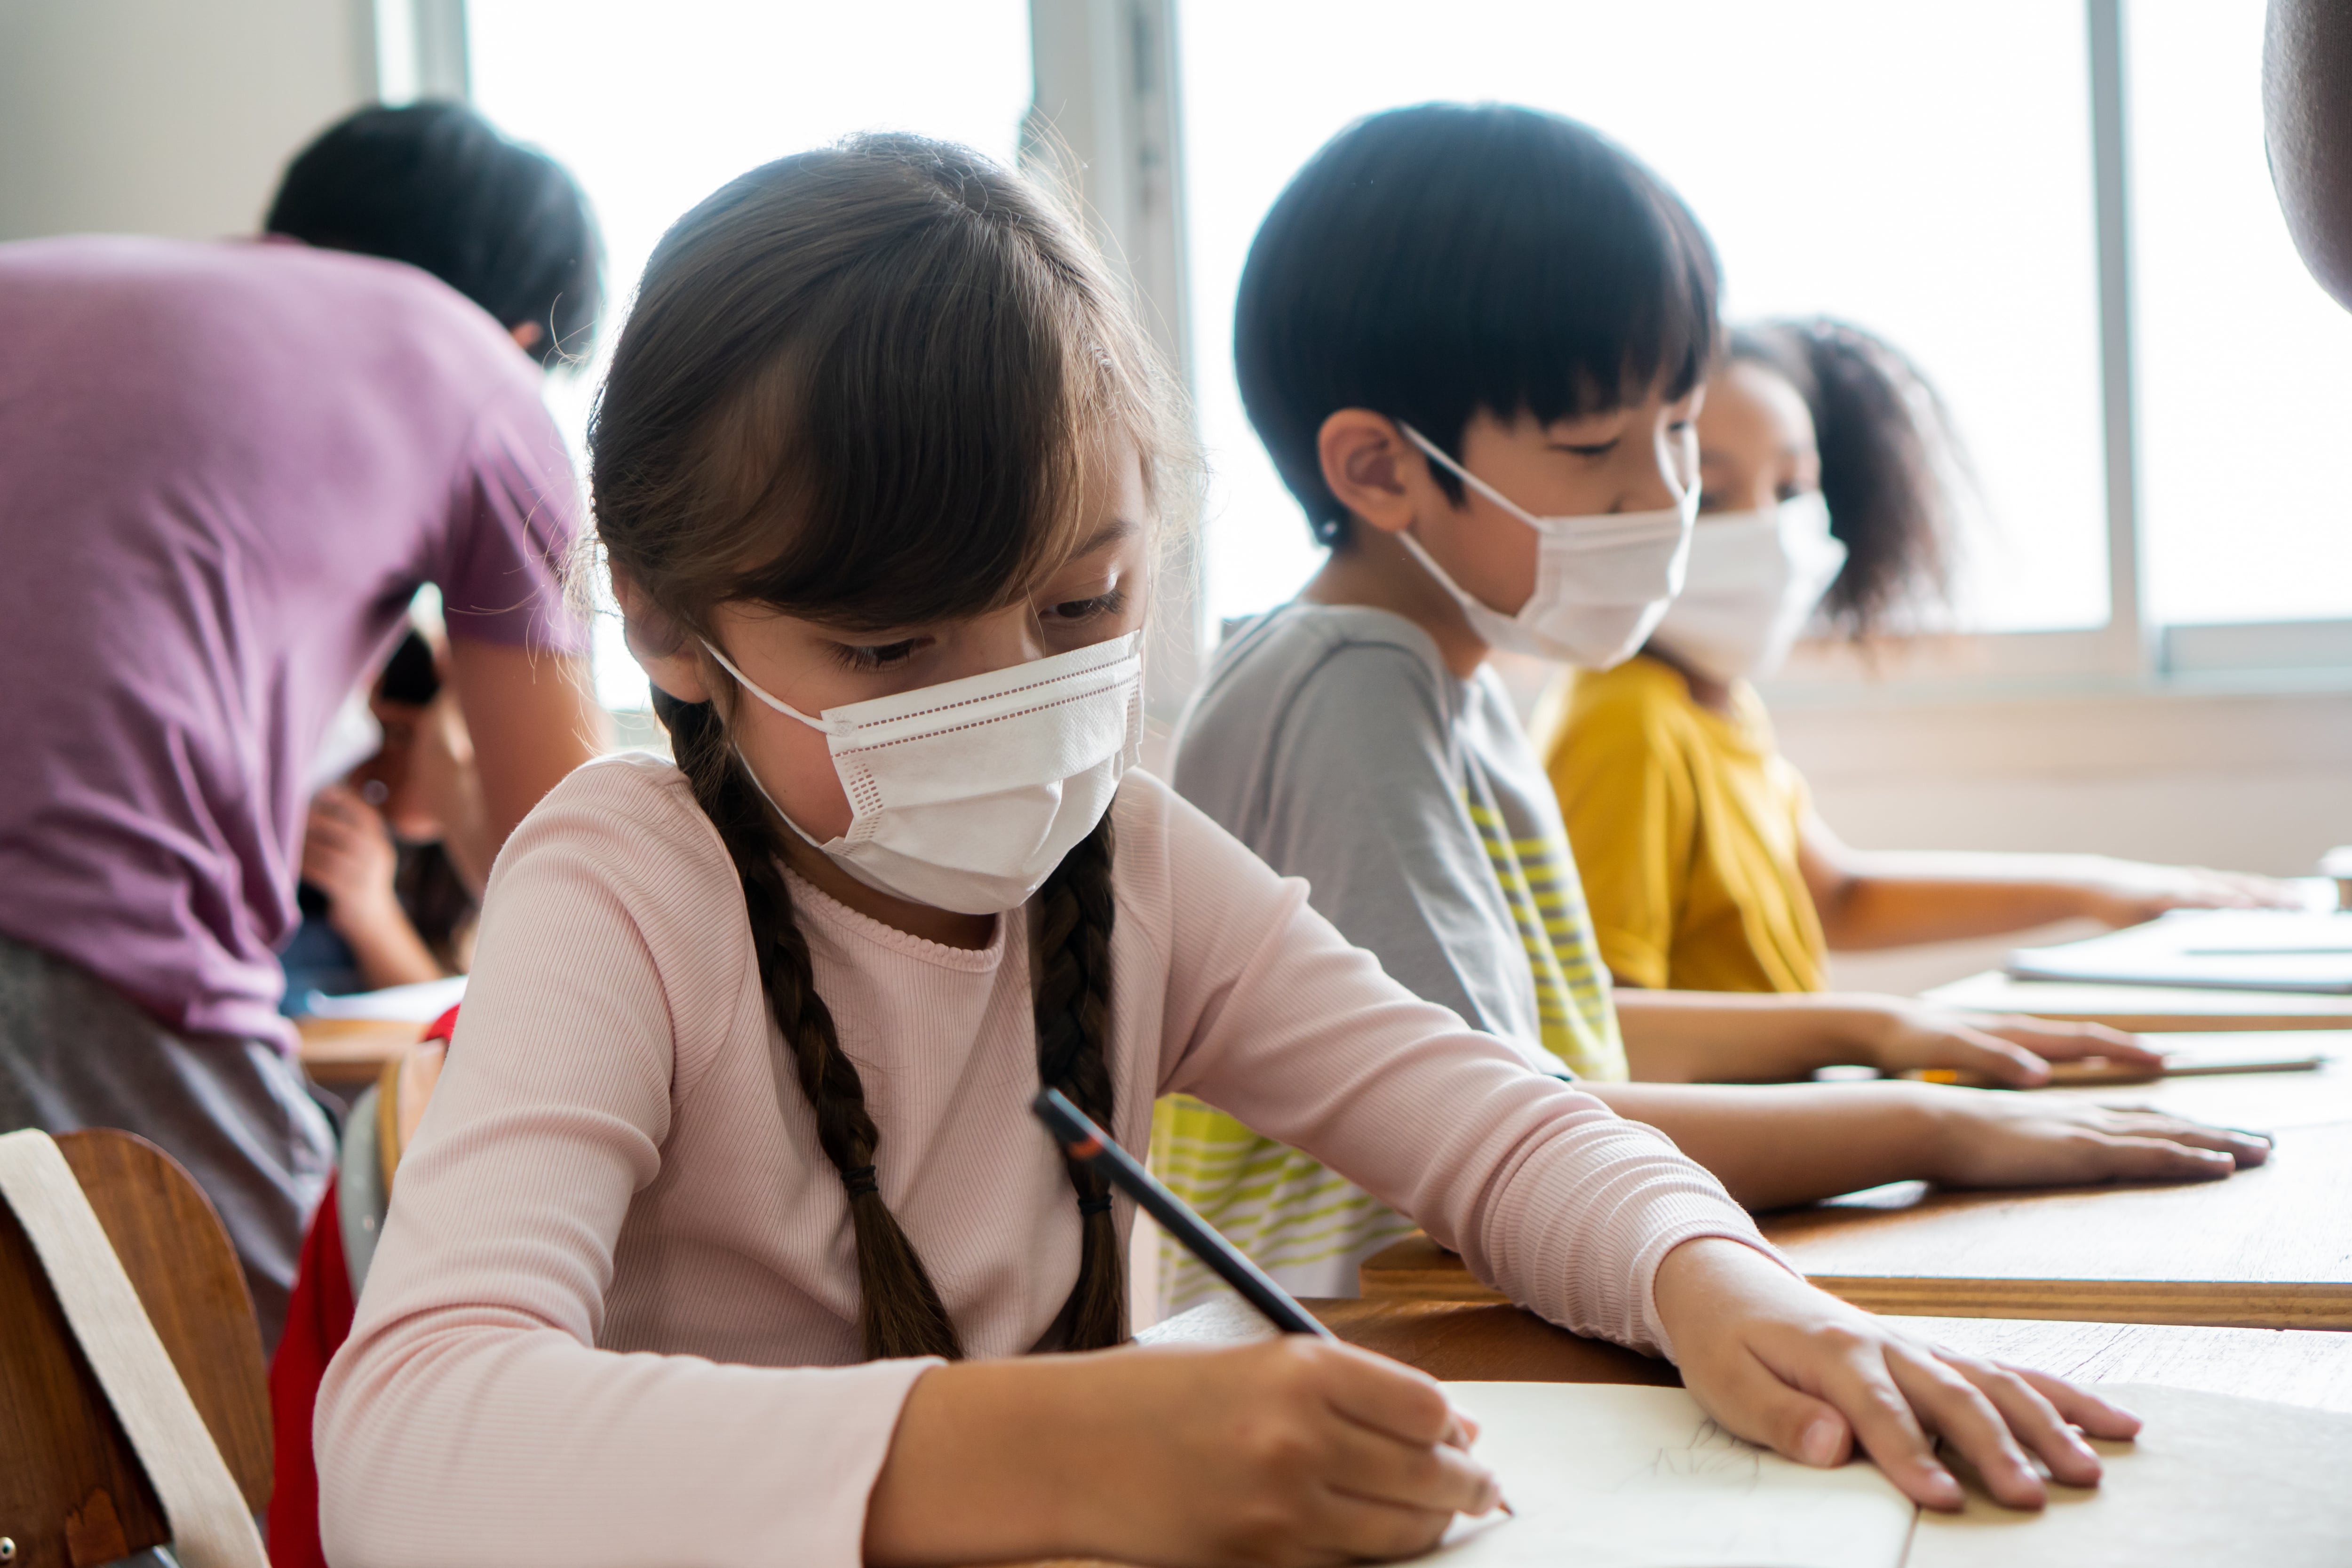 Multiethnic group of school children wearing face coverings sitting at school desks, writing.